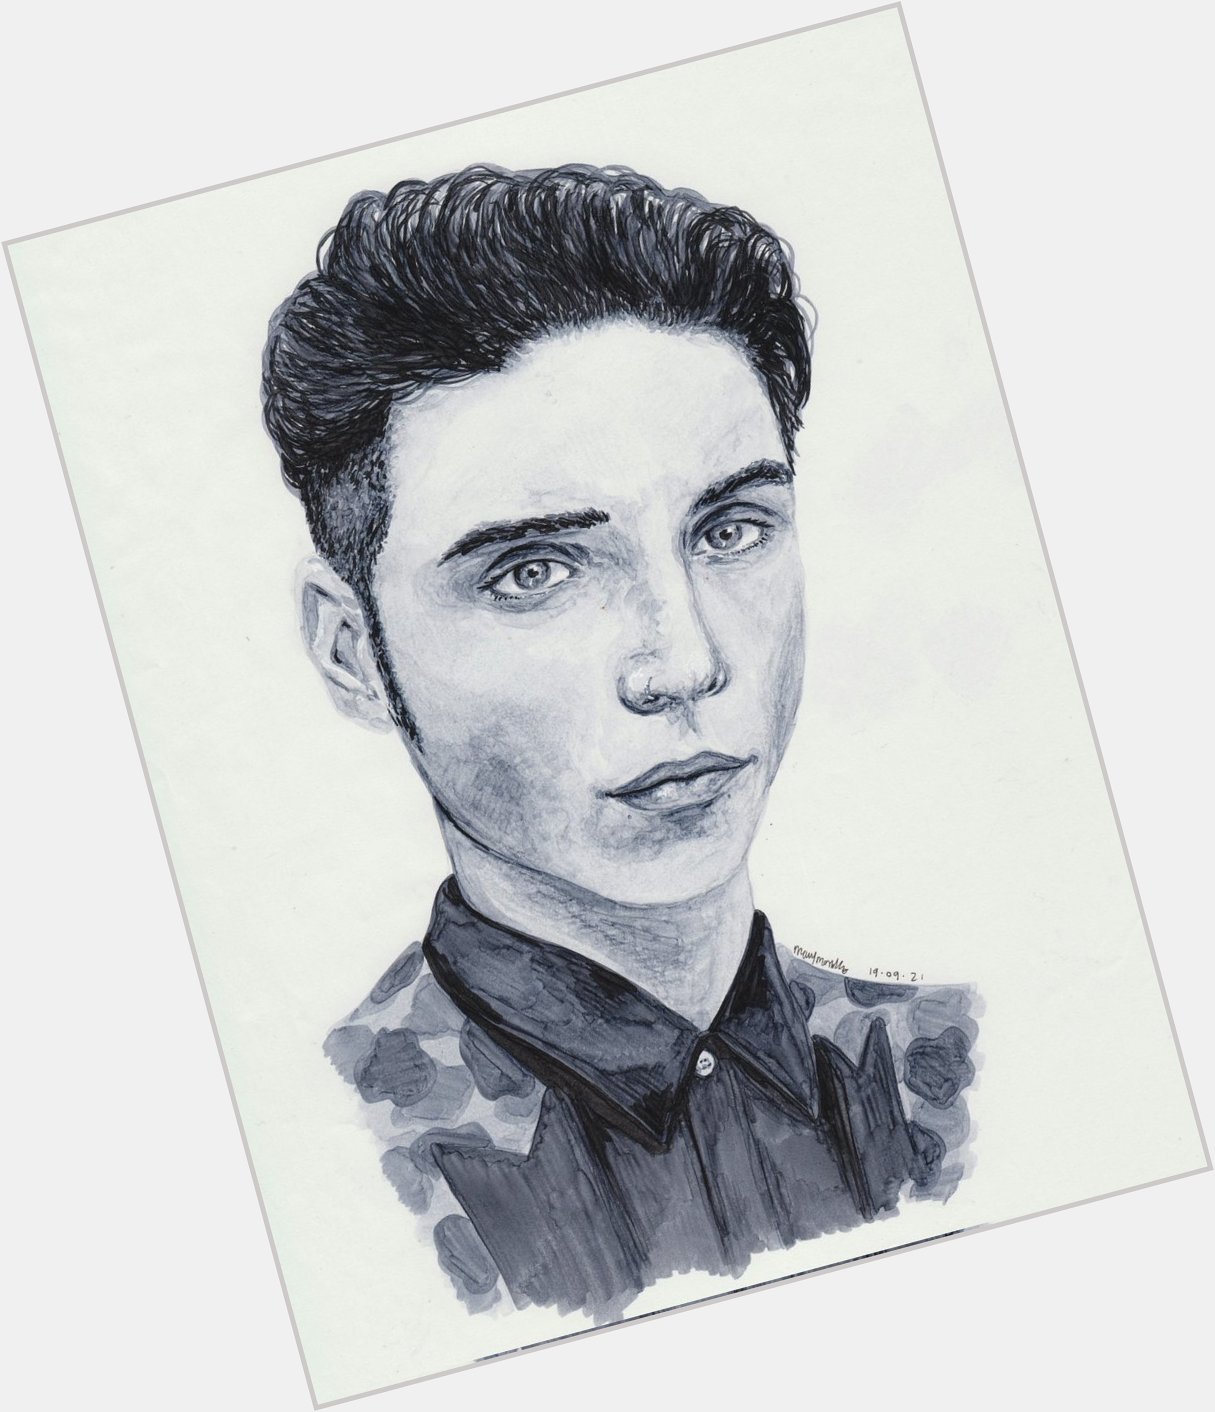 Happy birthday to Andy Biersack of 